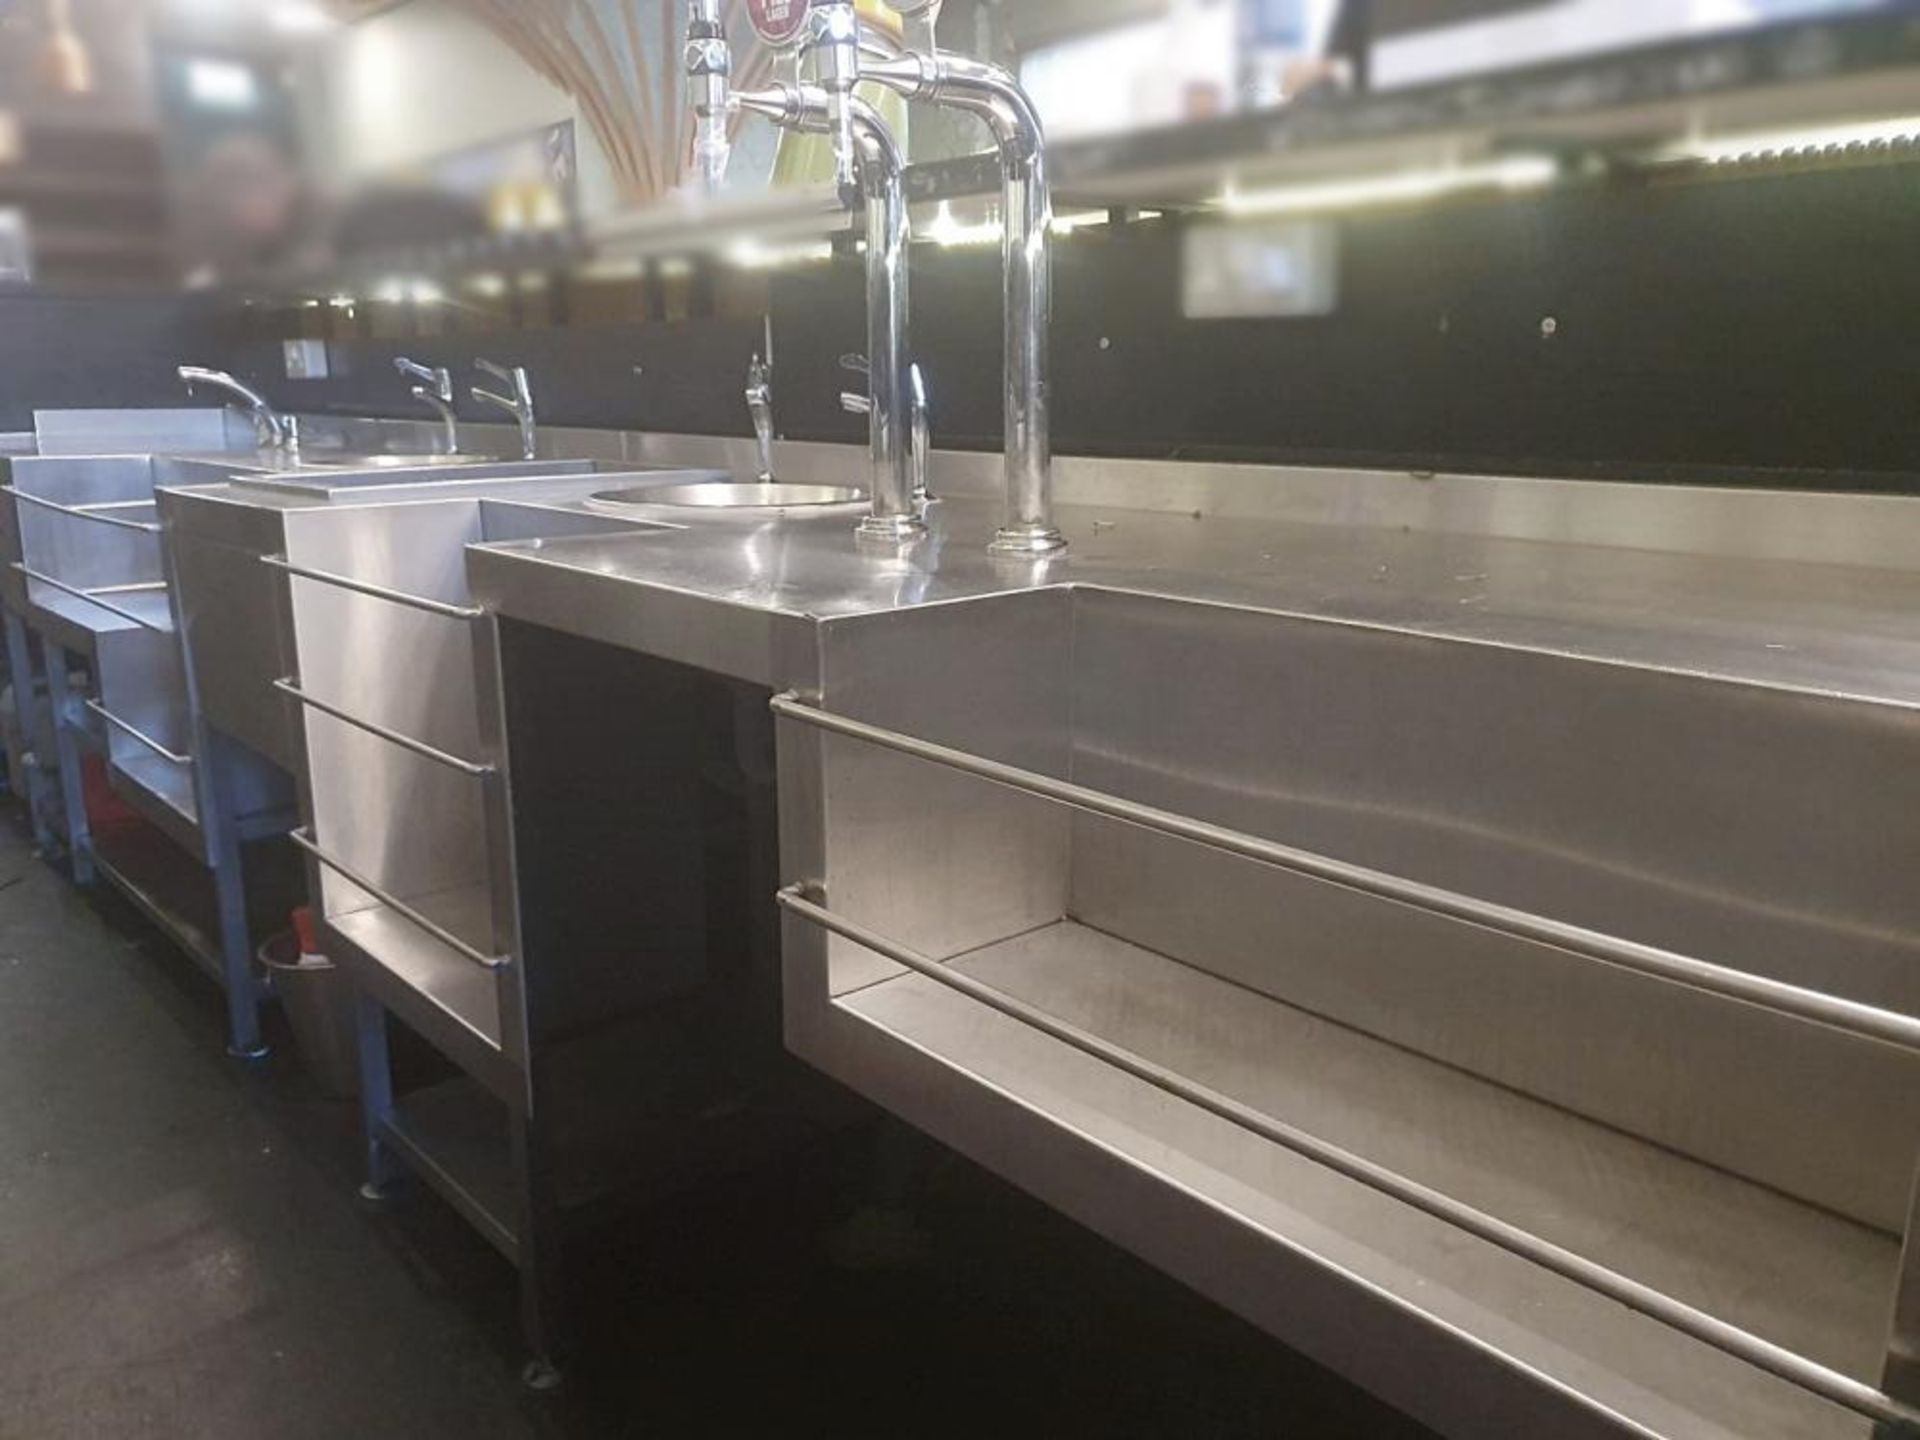 1 x Stainless Steel Back Bar - Features Hand Basins, Ice Wells With Bottle Speed Rails and More - Di - Image 2 of 10